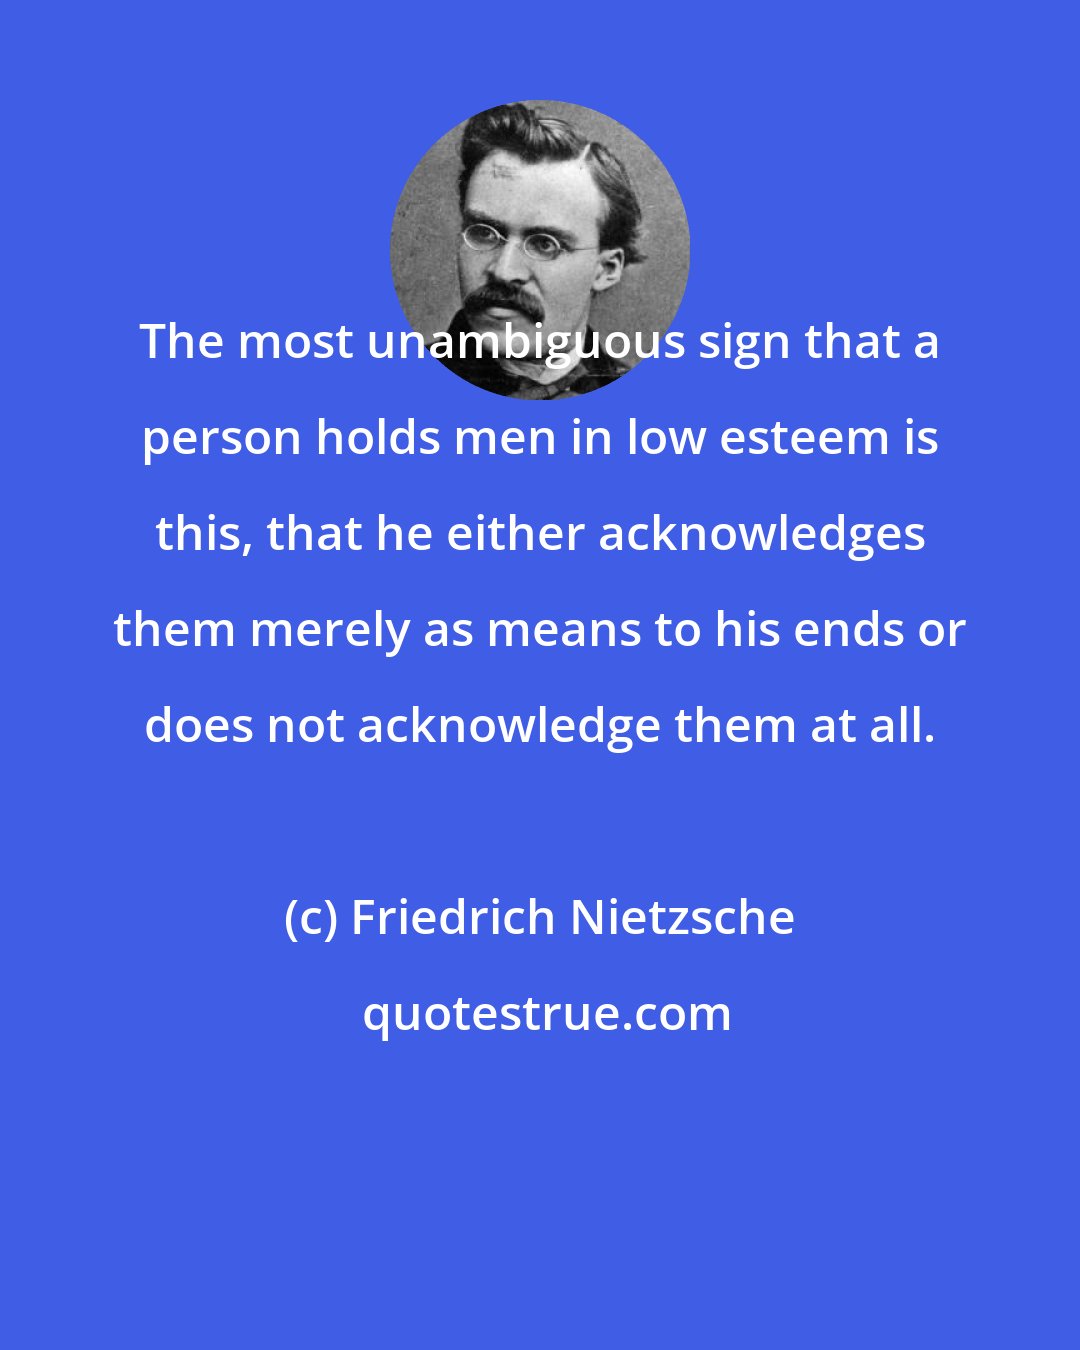 Friedrich Nietzsche: The most unambiguous sign that a person holds men in low esteem is this, that he either acknowledges them merely as means to his ends or does not acknowledge them at all.